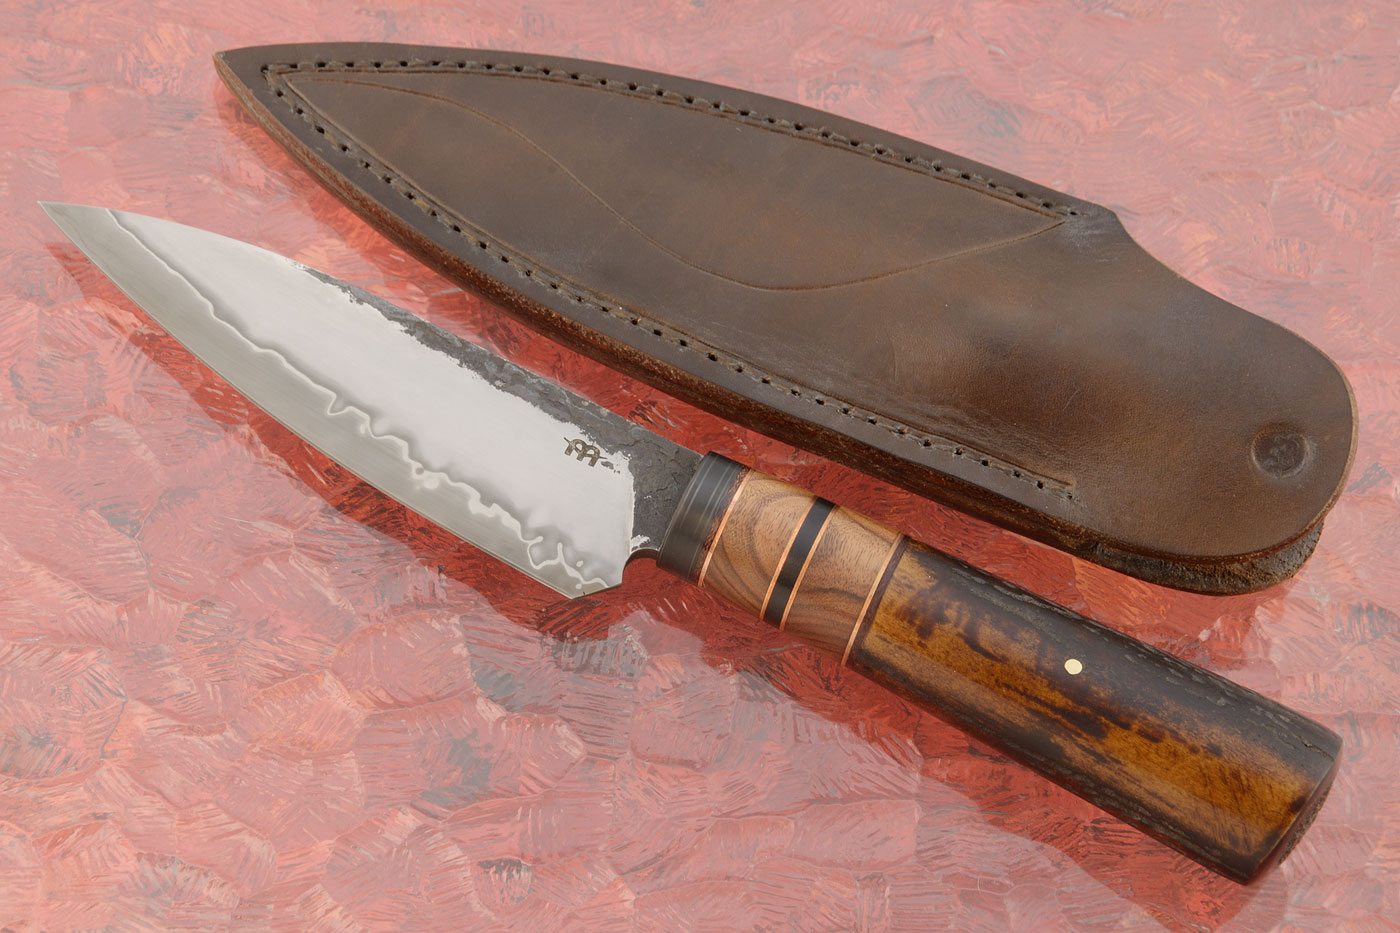 Utilitarian: San Mai Belt Knife with Madagascar Rosewood and Stag